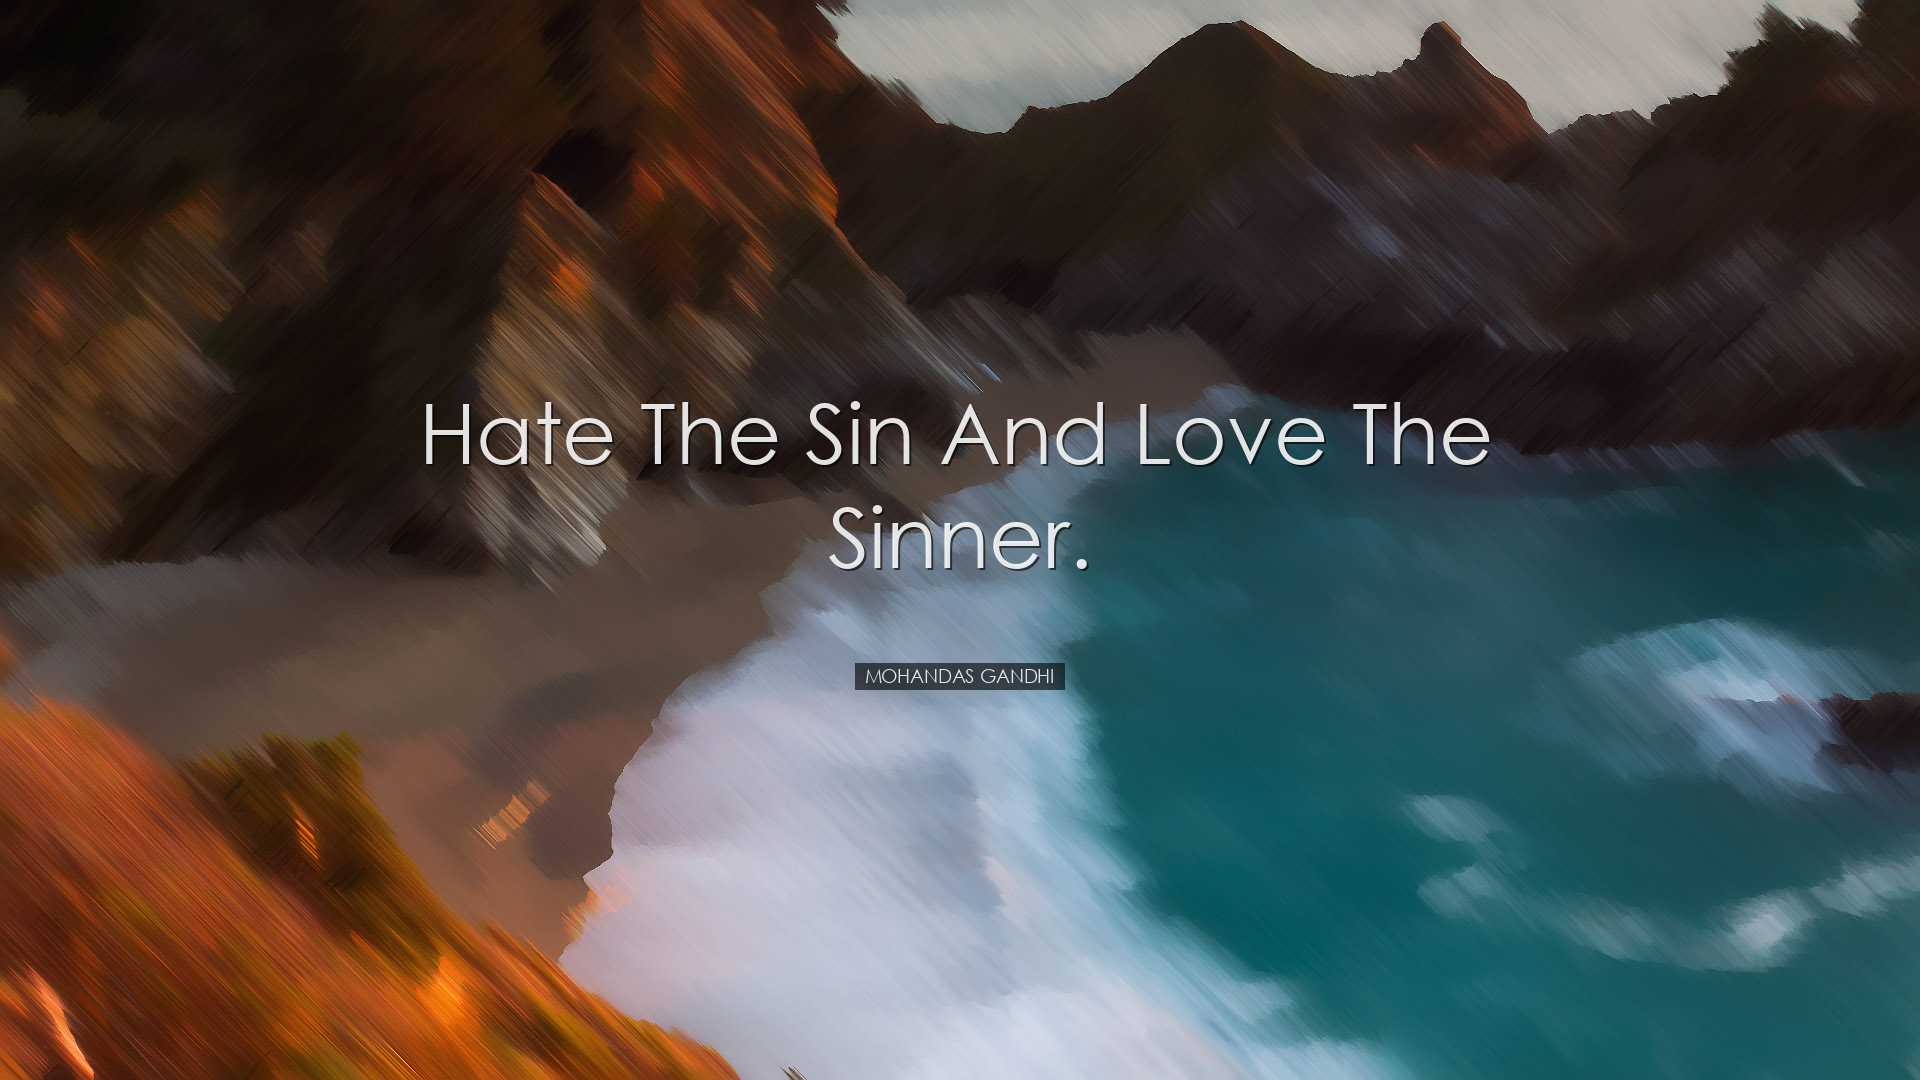 Hate the sin and love the sinner. - Mohandas Gandhi